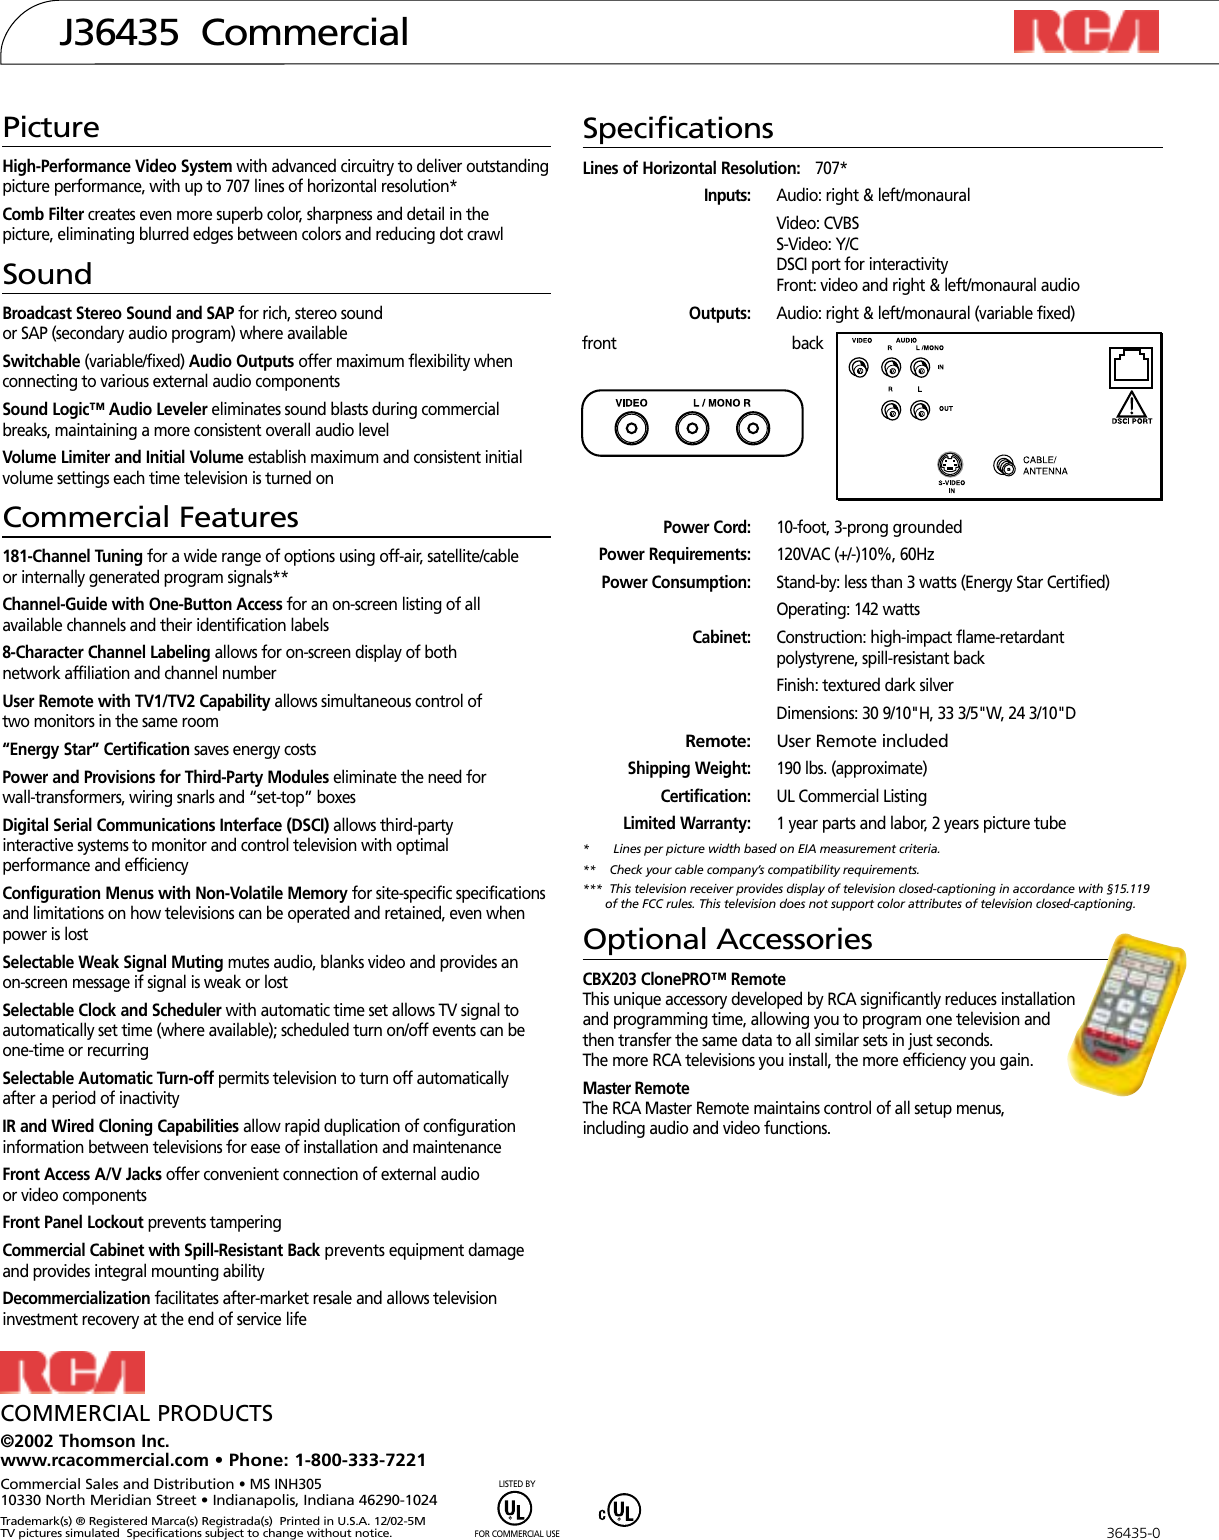 Page 2 of 2 - Rca Rca-J36435-Users-Manual- RCA41426 CommSpecJ36435  Rca-j36435-users-manual